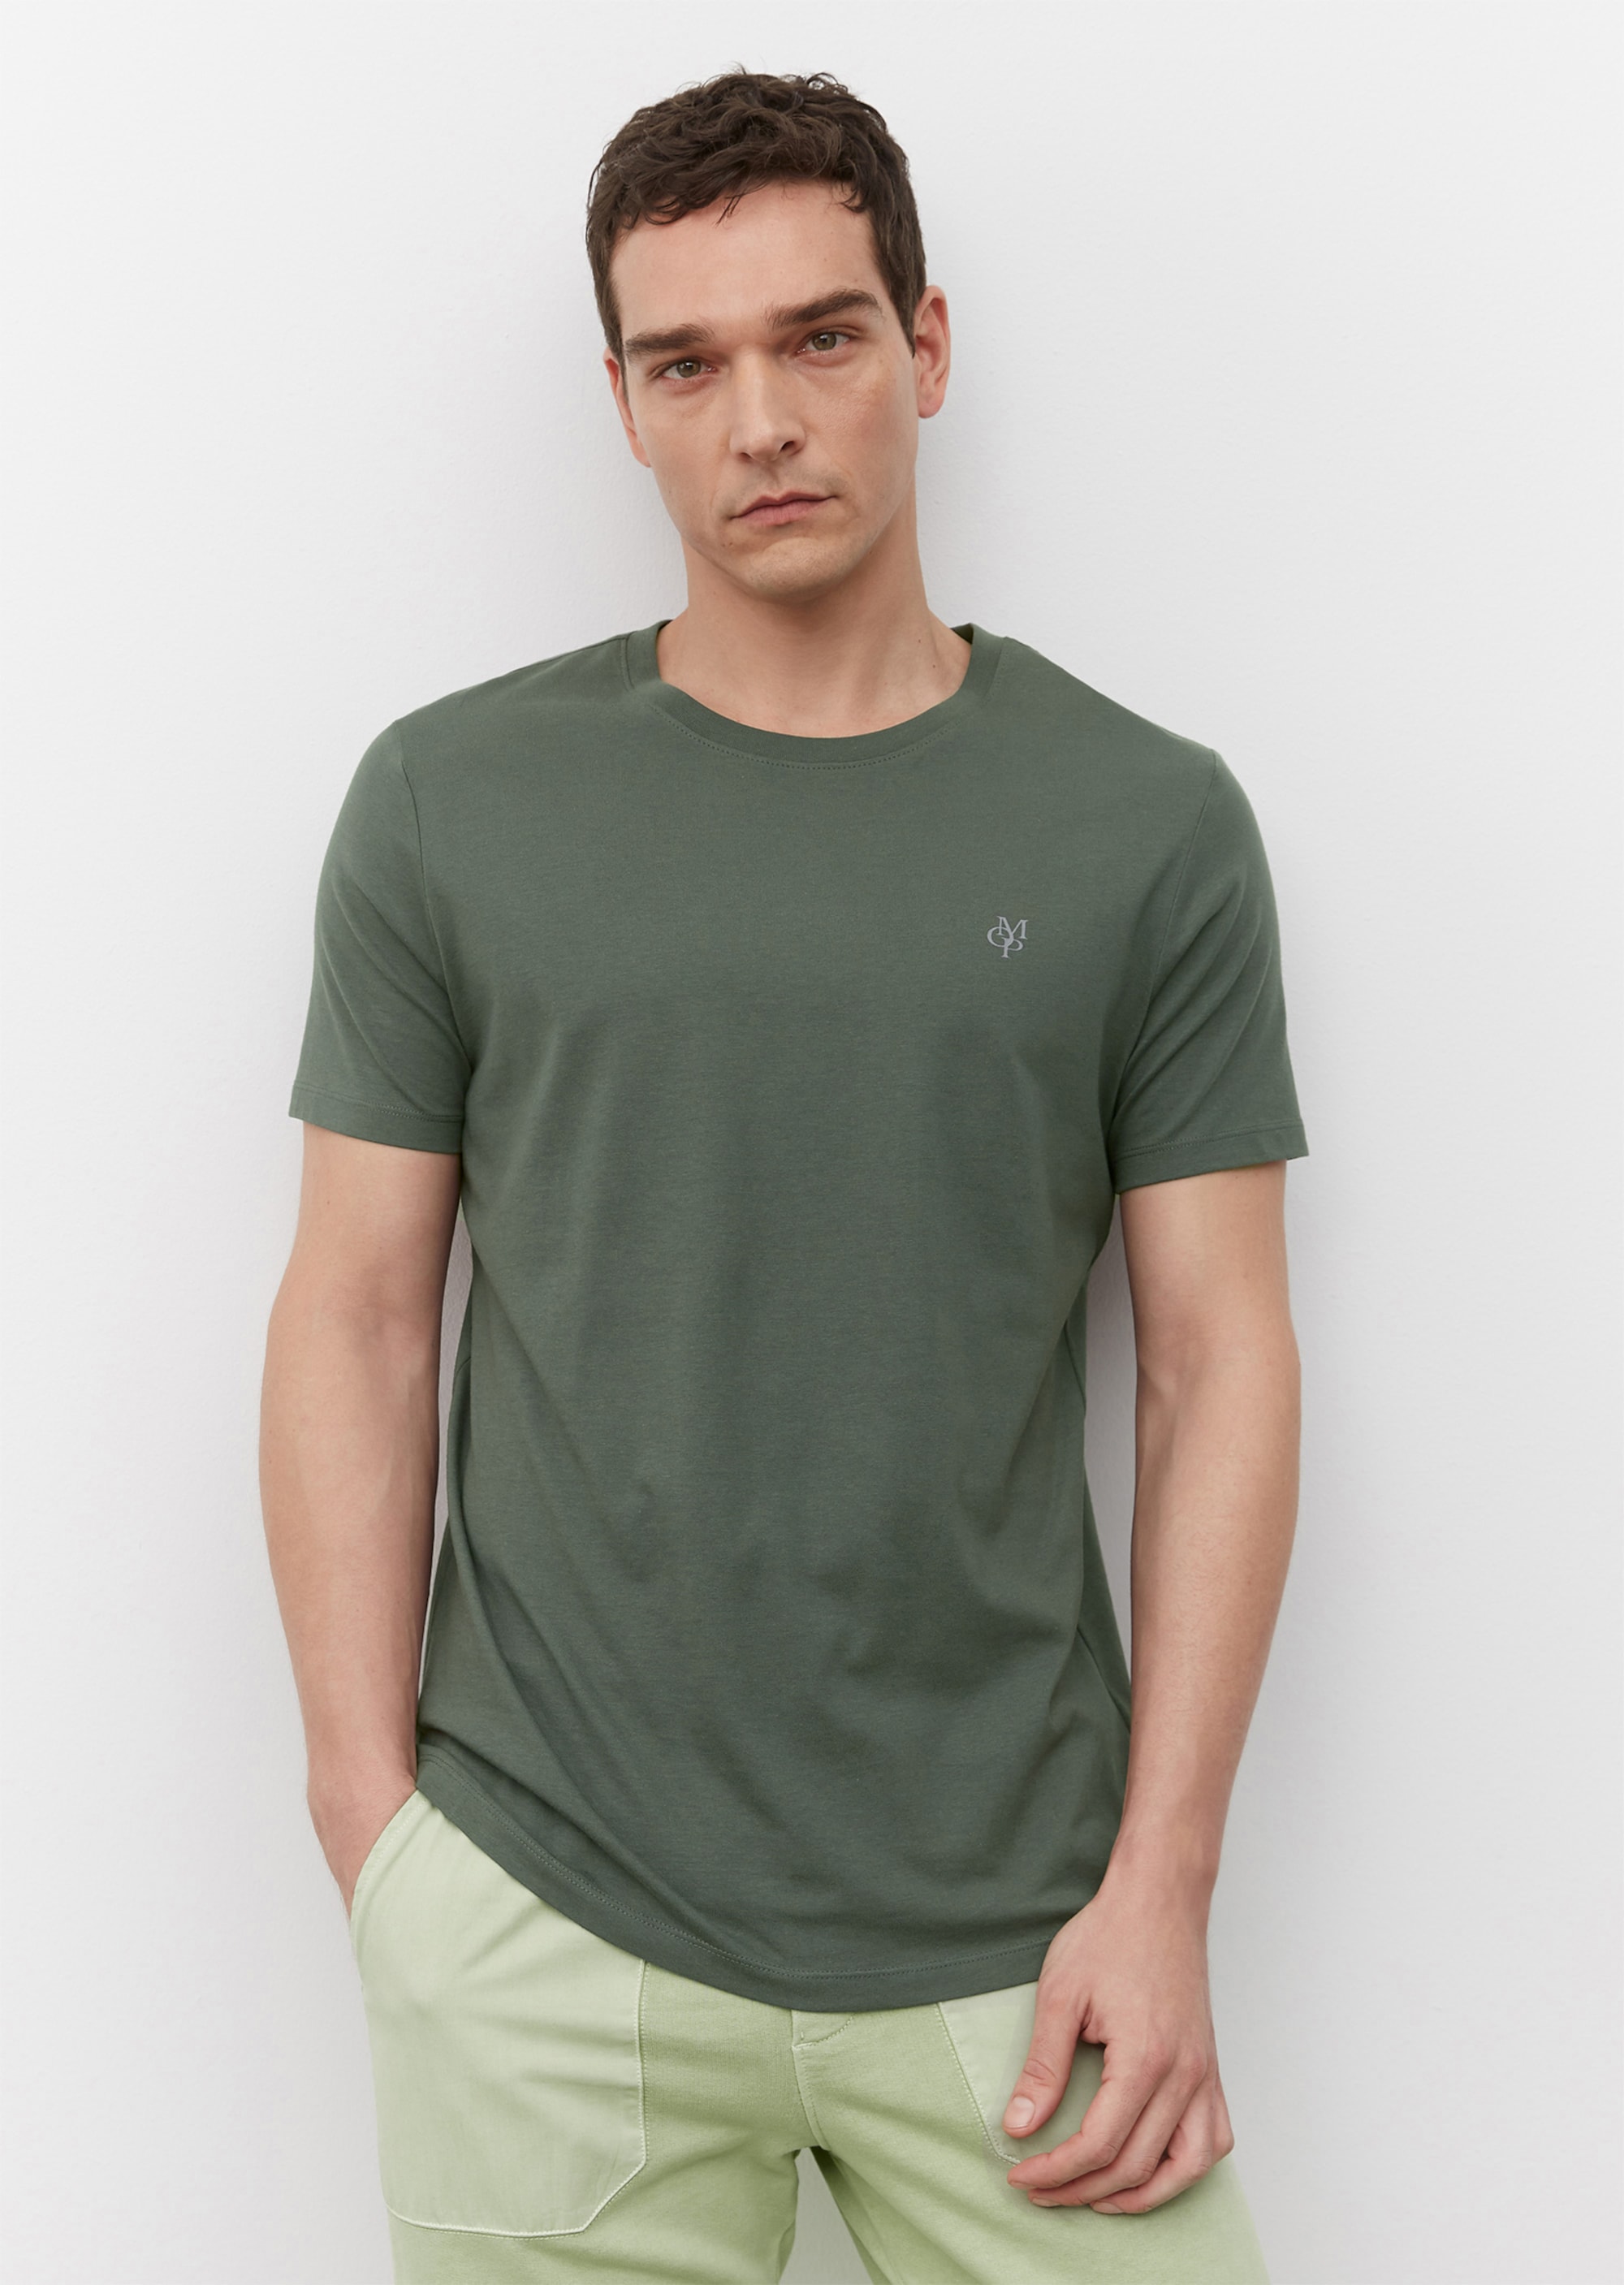 Round neck T-shirt, regular fit made of pure organic cotton